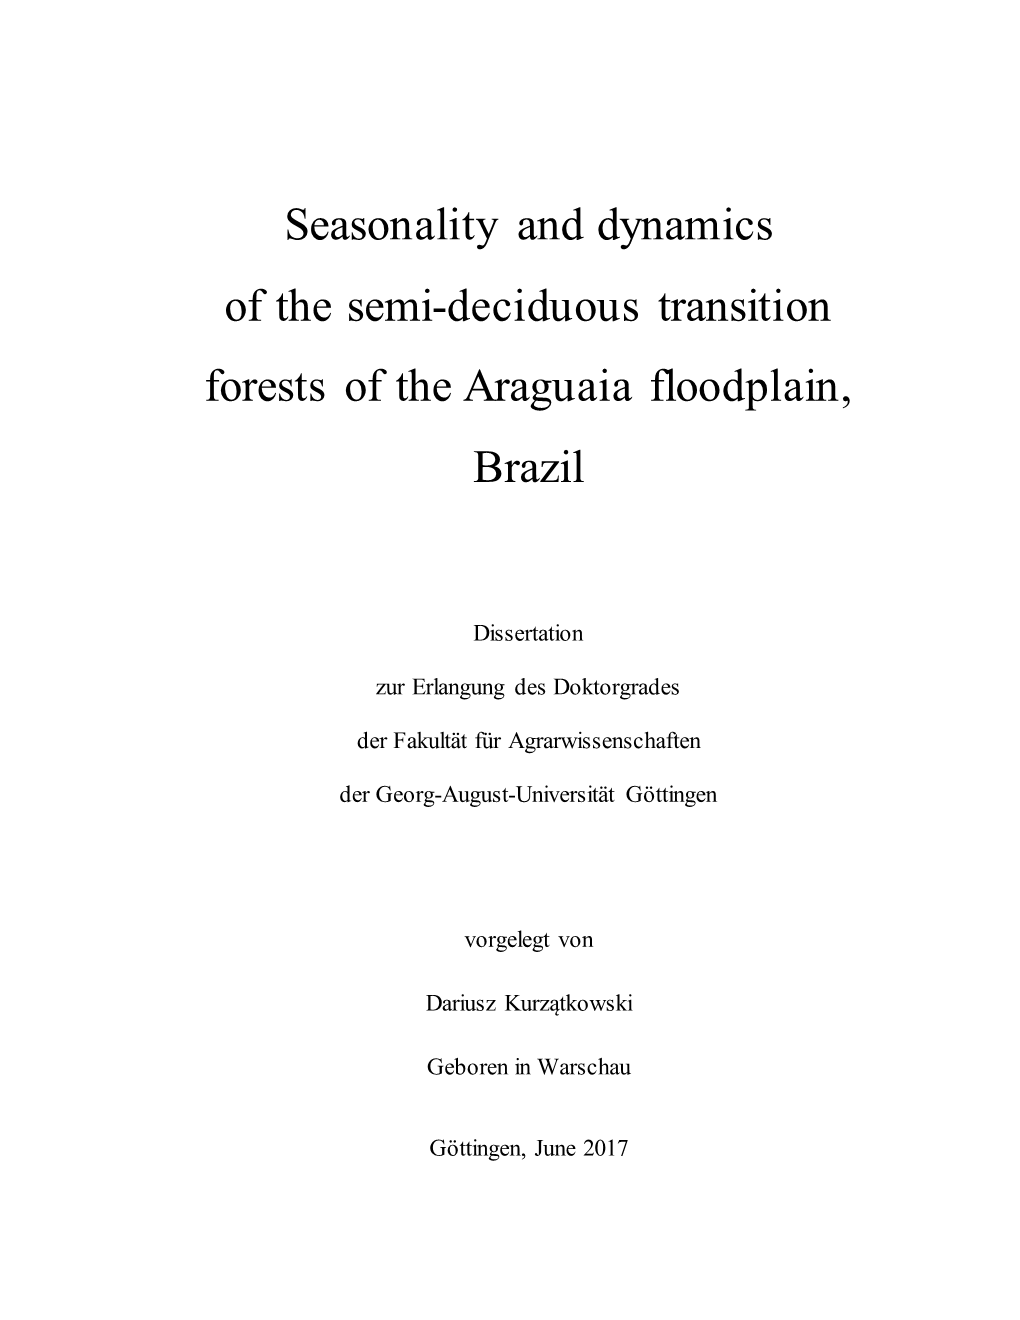 Biomass Dynamics in Transition Forest on Bananal Island, Brazil